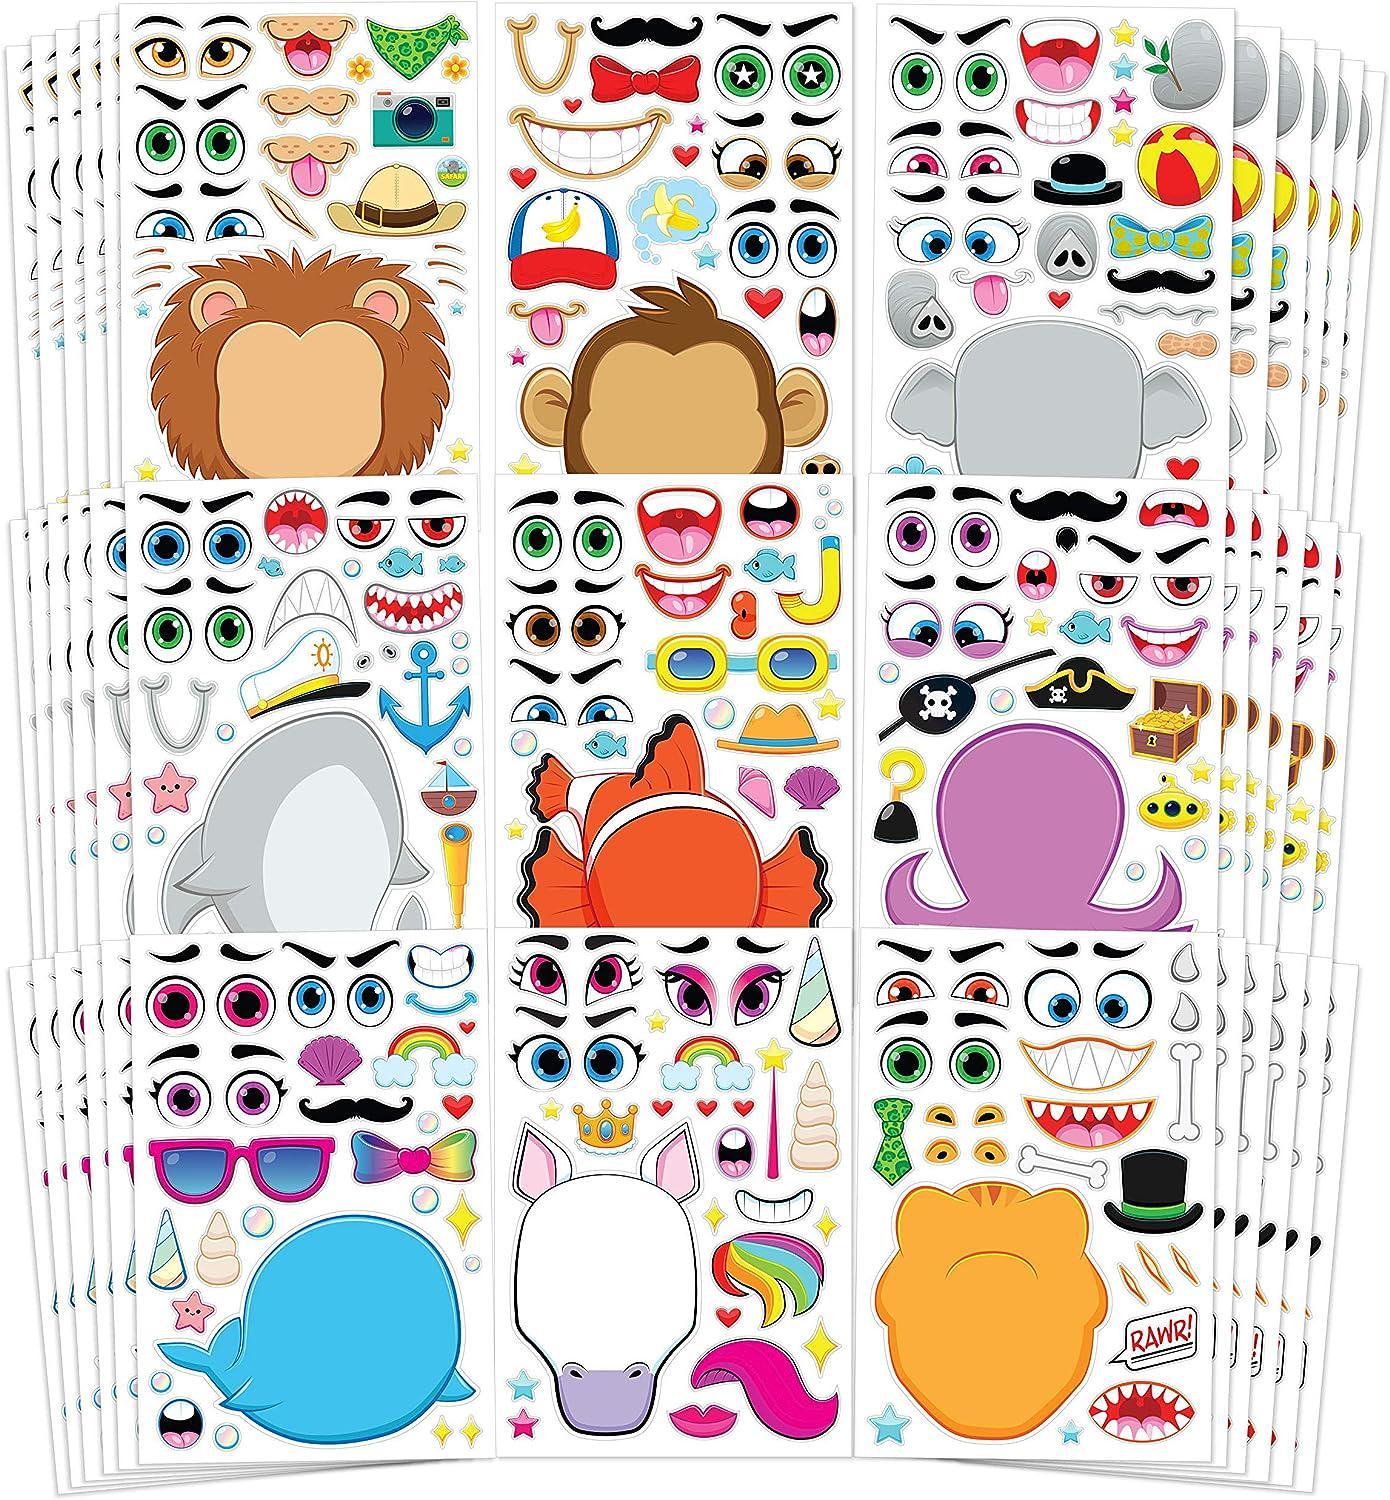 36 Sheets Make-a-Face Stickers for Kids (690 Stickers) Make Your